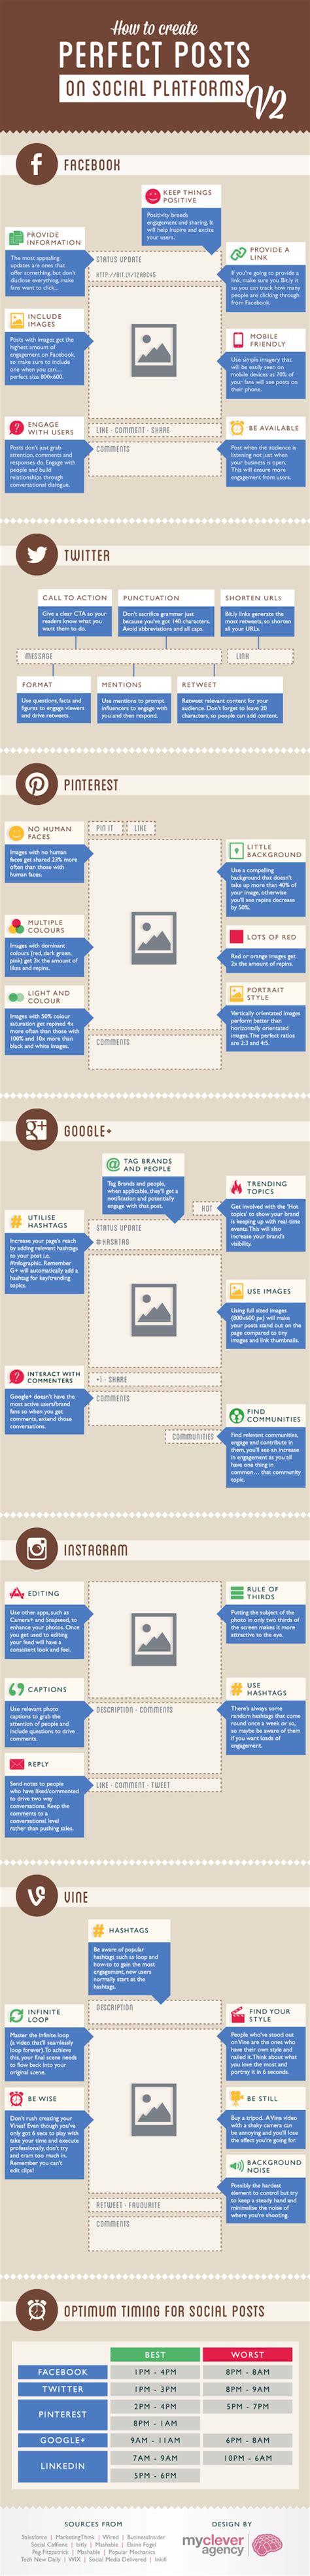 guide  perfect social network posting infographic brandwatch